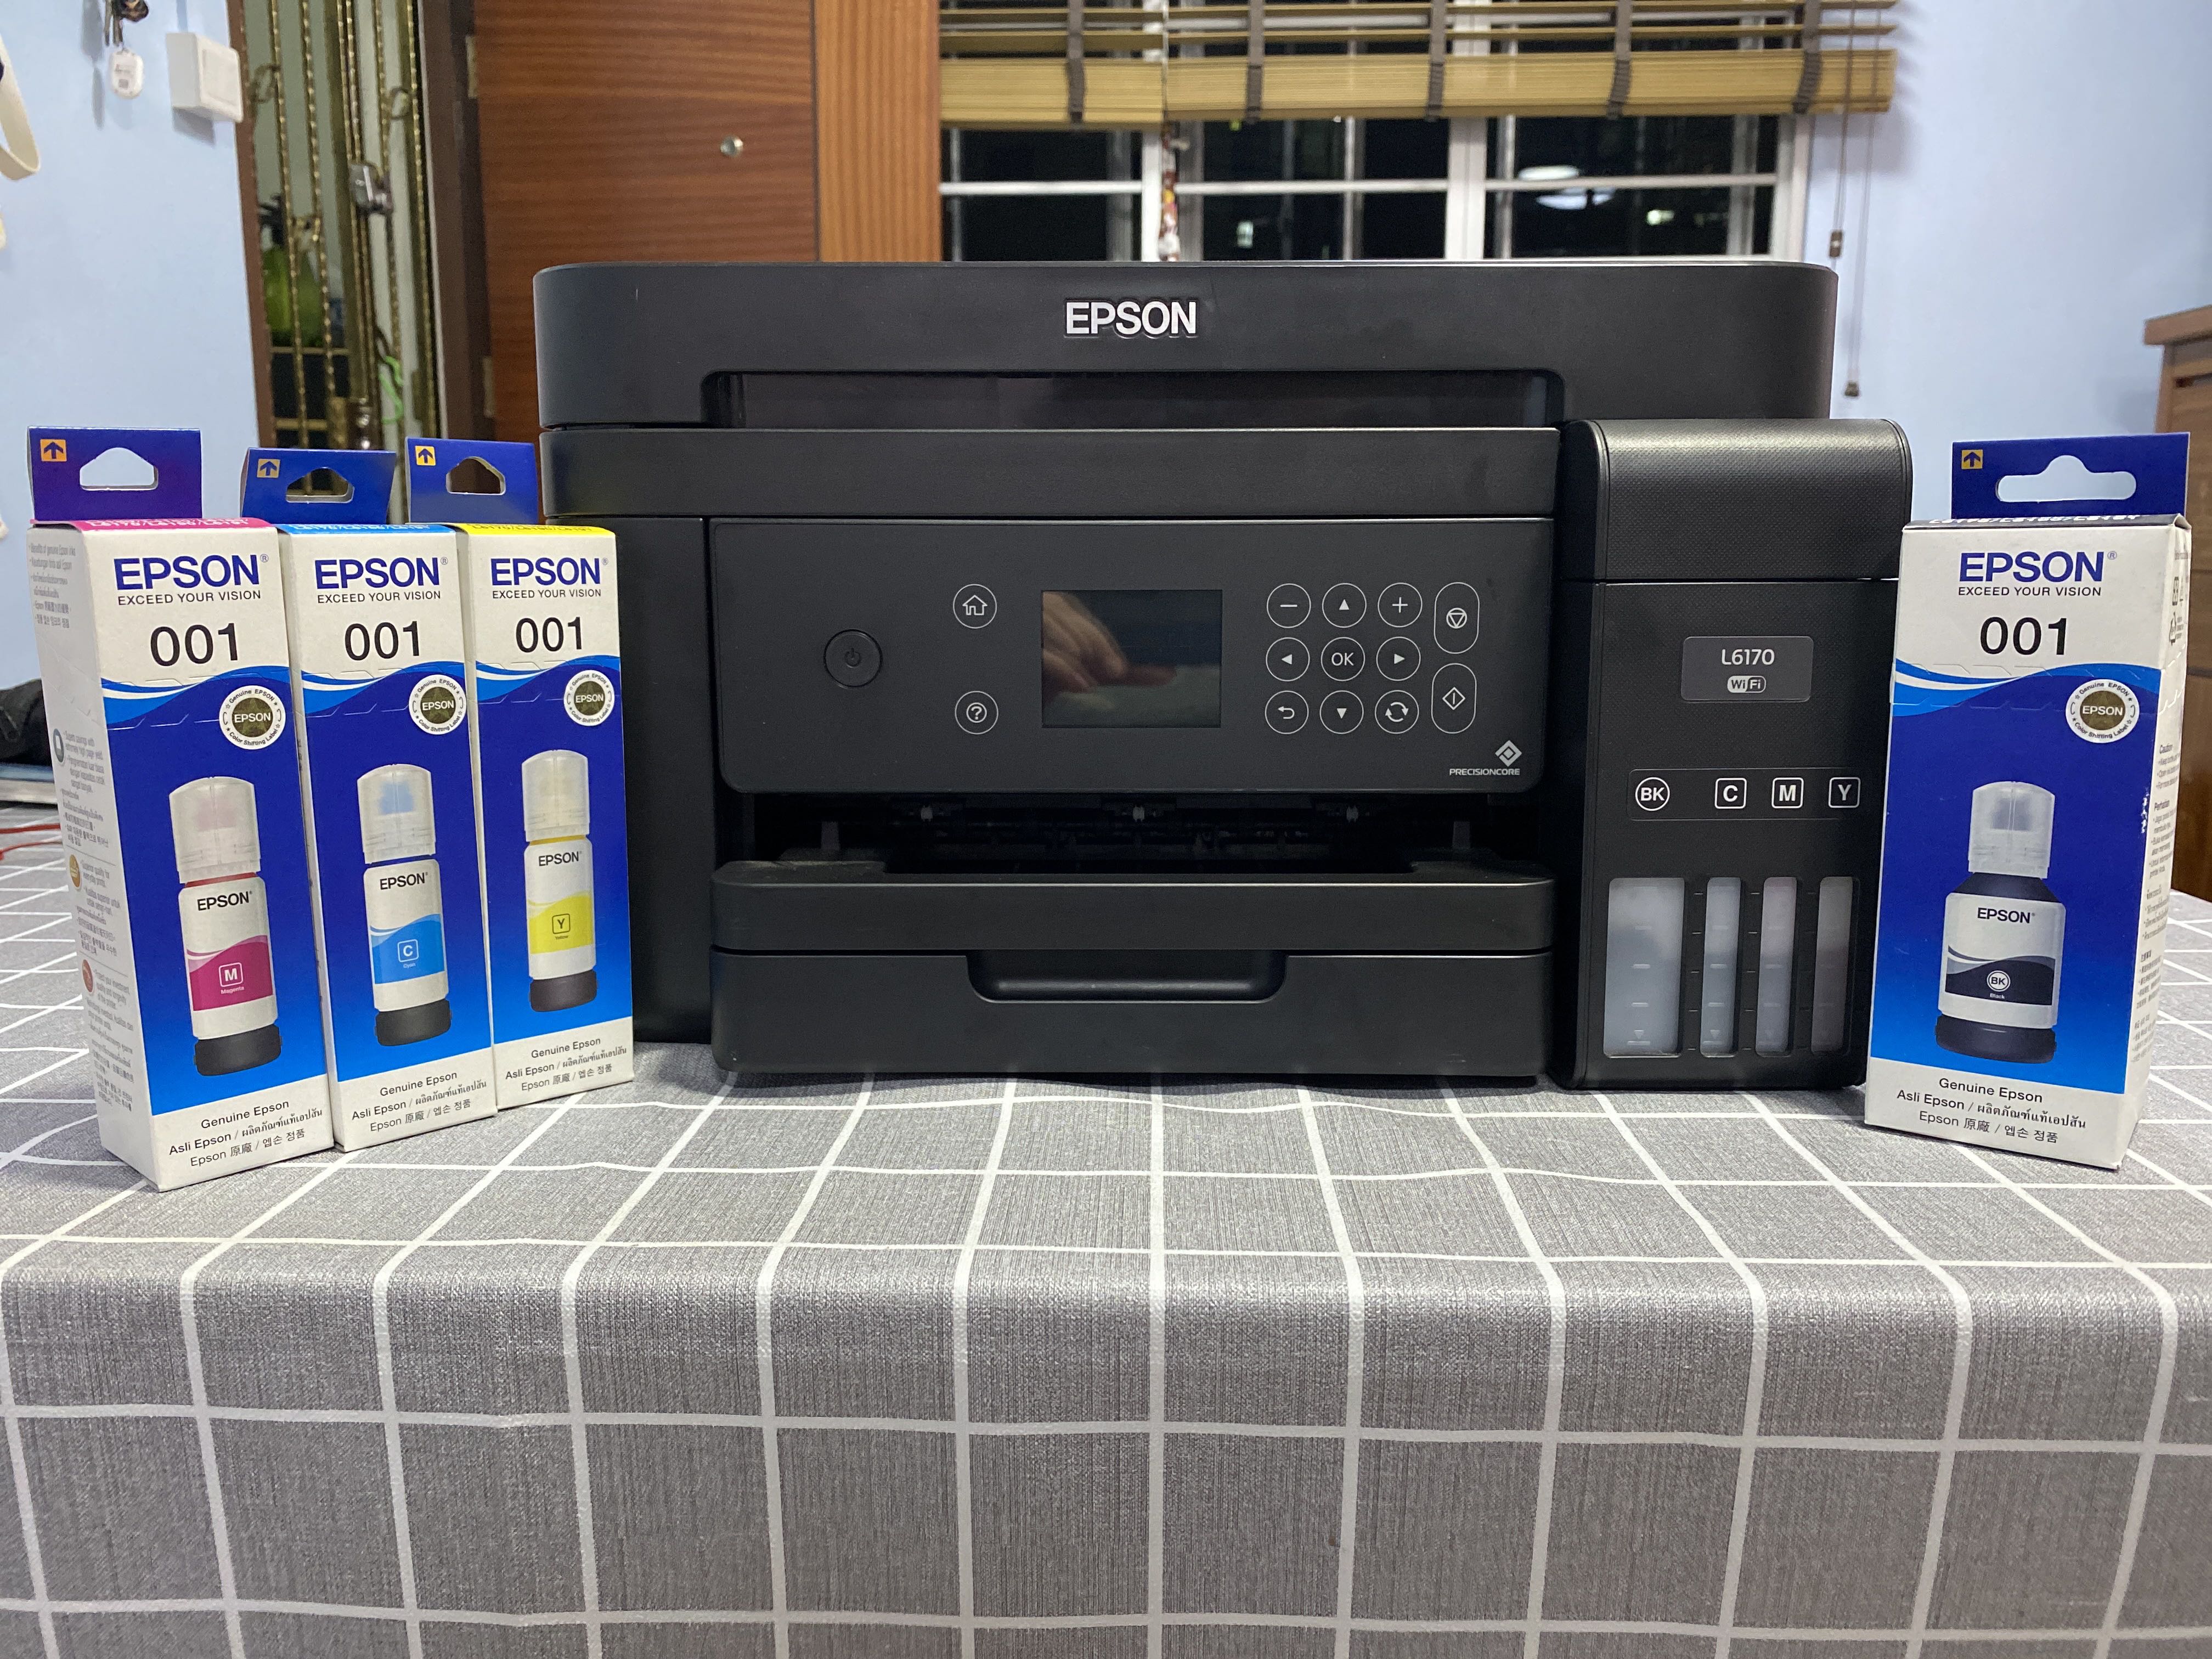 Epson L6170 Wi Fi Duplex All In One Ink Tank Printer With Adf 5505